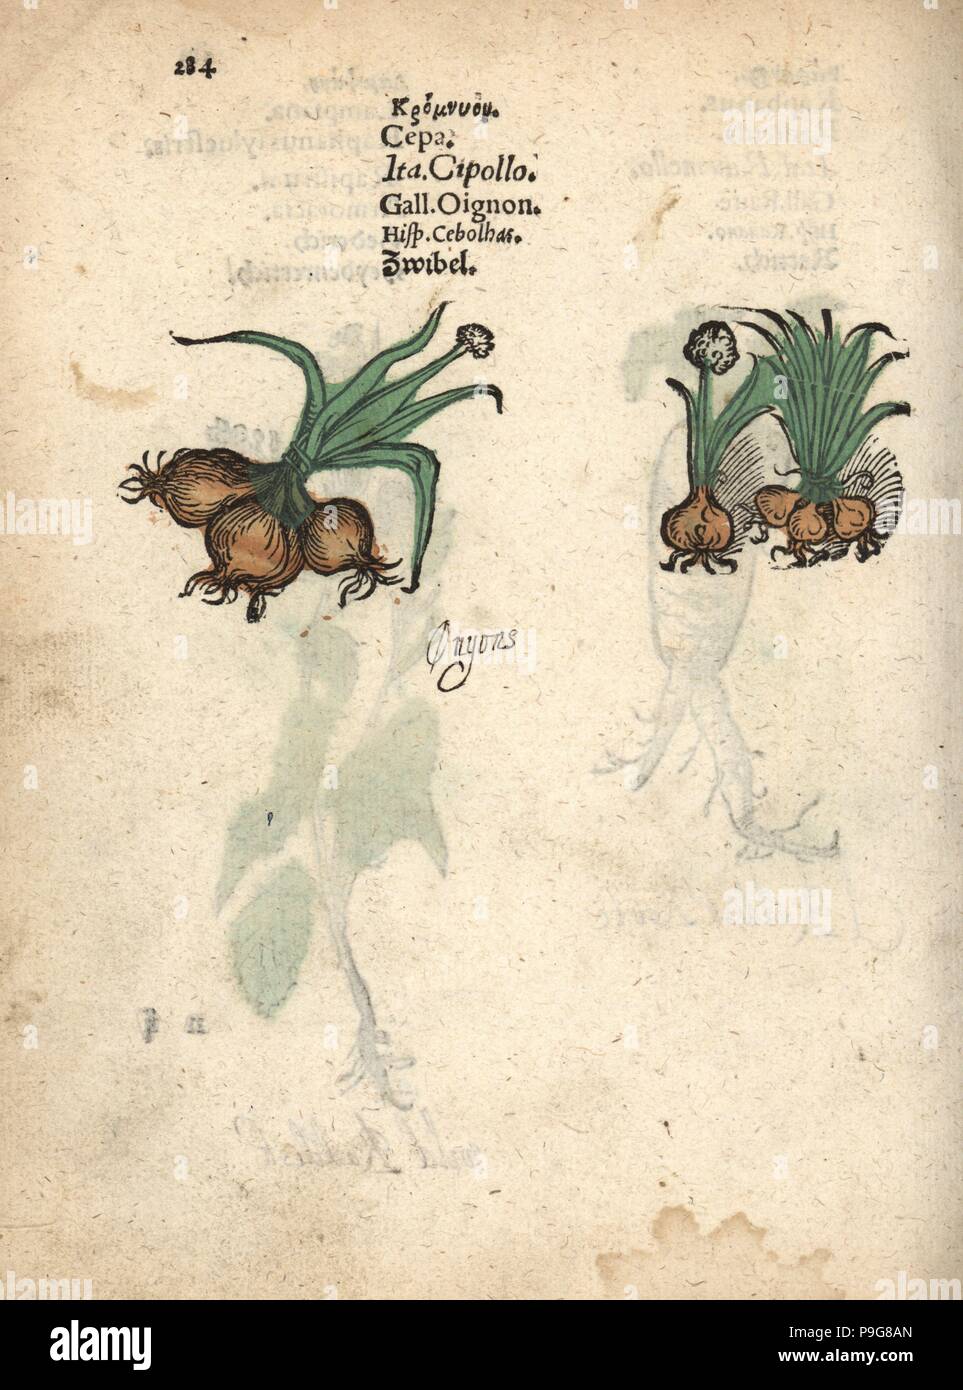 Onions, Allium cepa. Handcoloured woodblock engraving of a botanical illustration from Adam Lonicer's Krauterbuch, or Herbal, Frankfurt, 1557. This from a 17th century pirate edition or atlas of illustrations only, with captions in Latin, Greek, French, Italian, German, and in English manuscript. Stock Photo